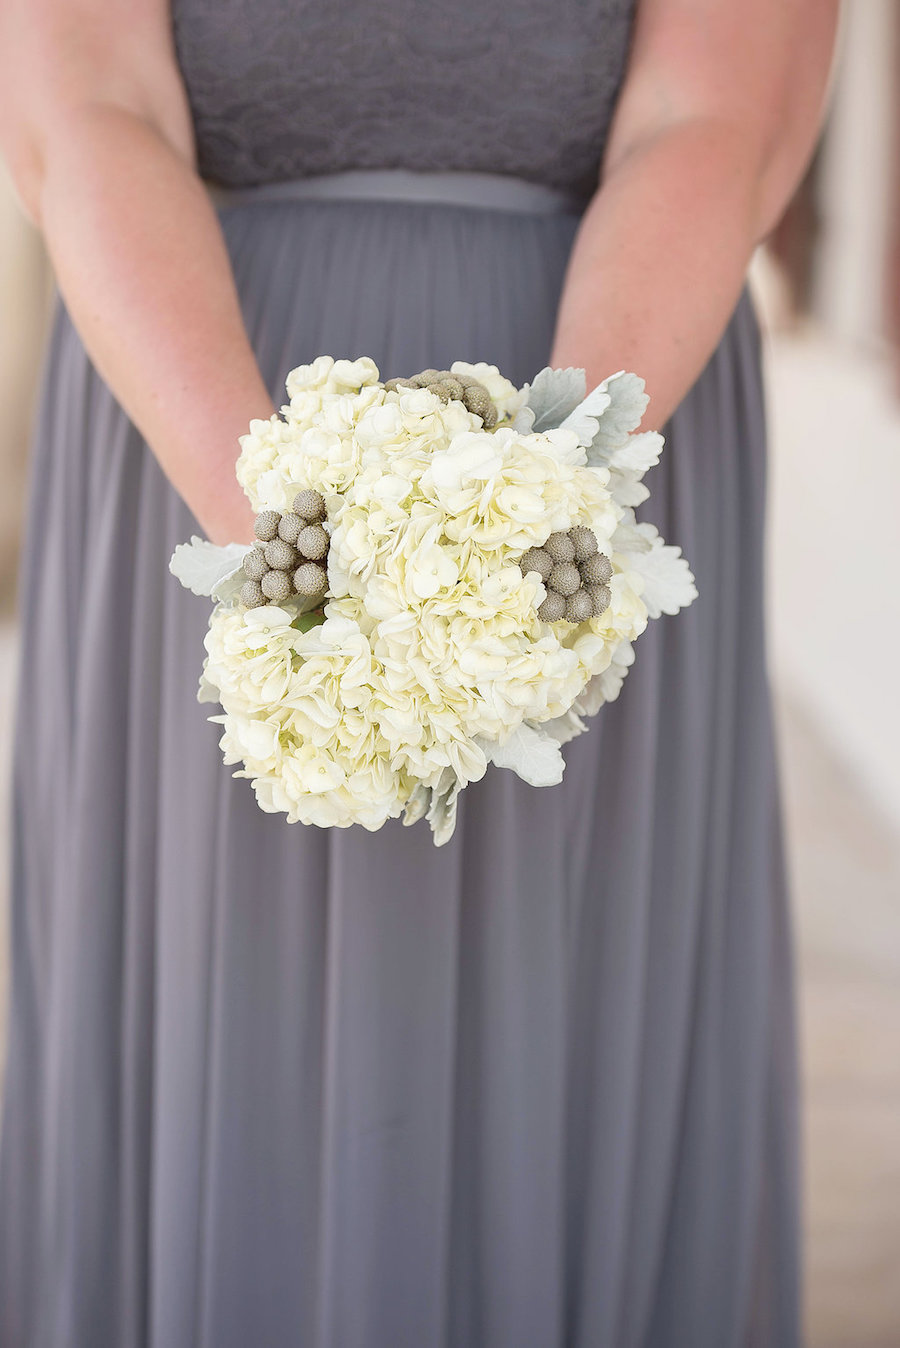 Grey Chiffon and Lace Bridesmaid Dress with White Hydrangea Wedding Bouquet with Dusty Miller and Hypericum Berries